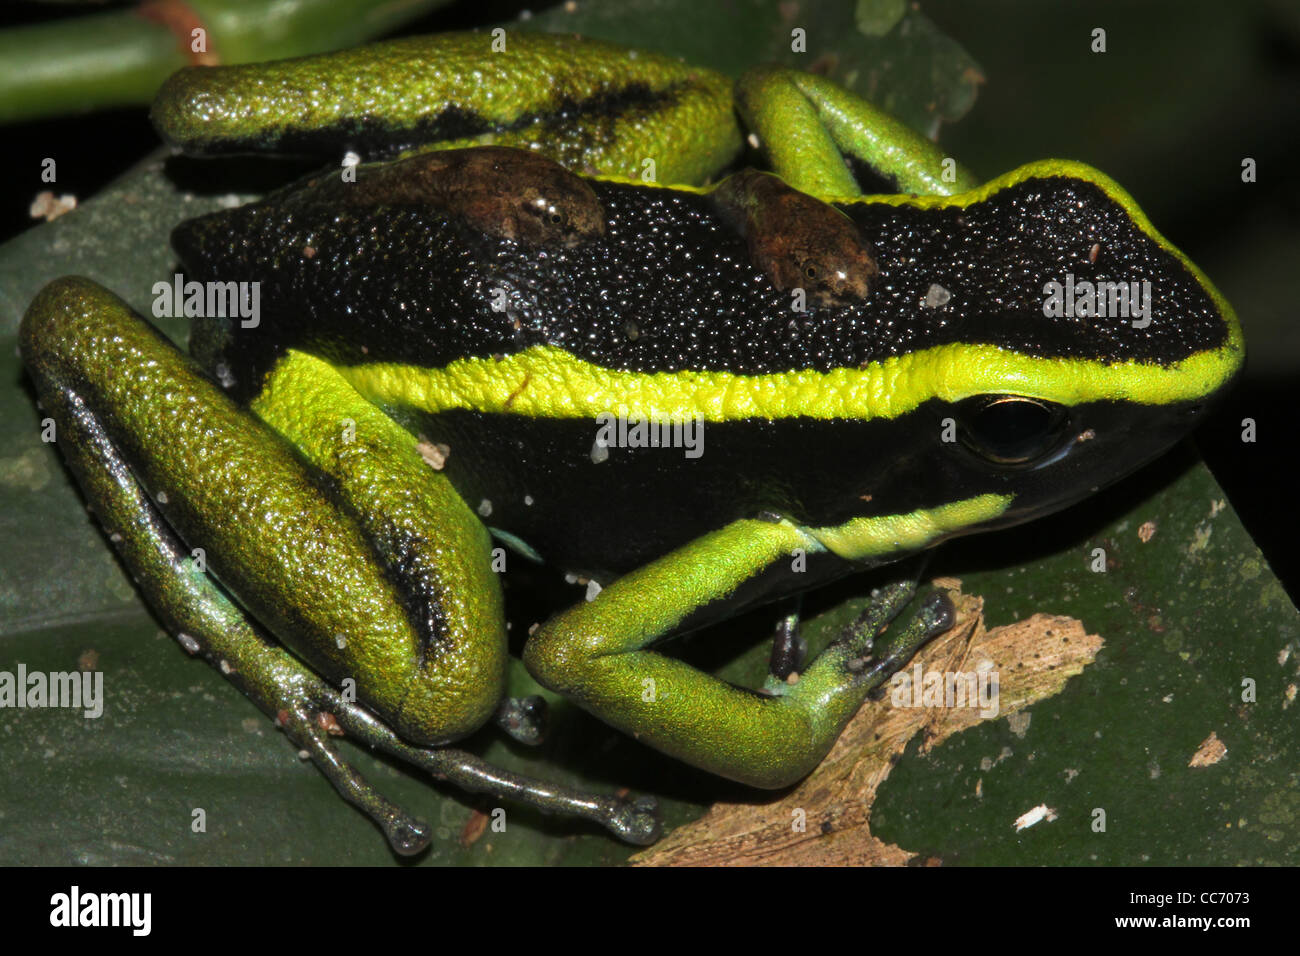 A magnificent Three-striped Poison Arrow Frog (Ameerega trivittata) carries tadpoles on its back in the Peruvian Amazon Stock Photo